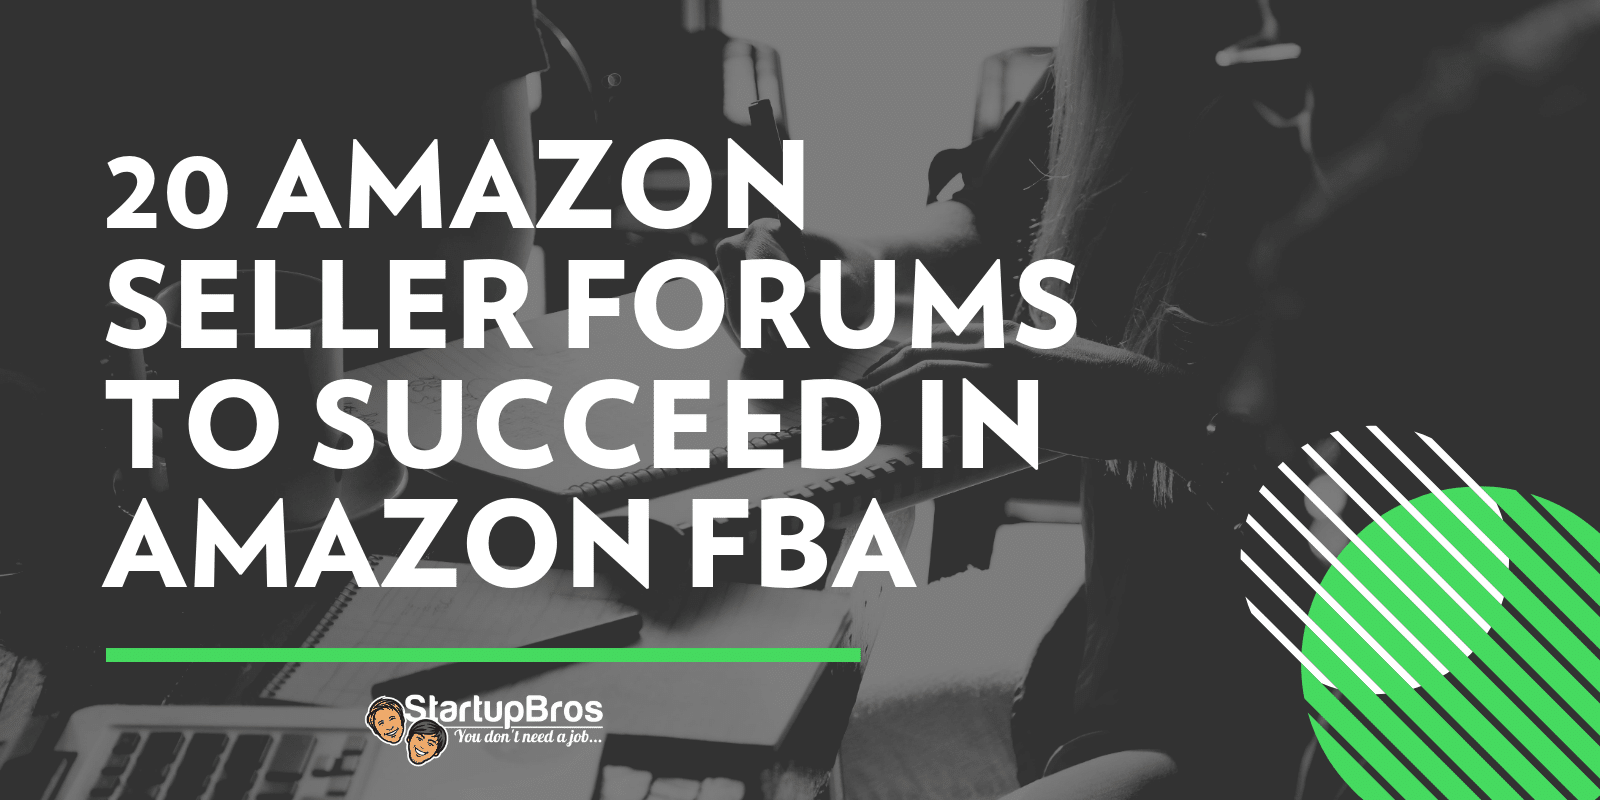 20 Amazon Seller Forums to Succeed in Amazon FBA